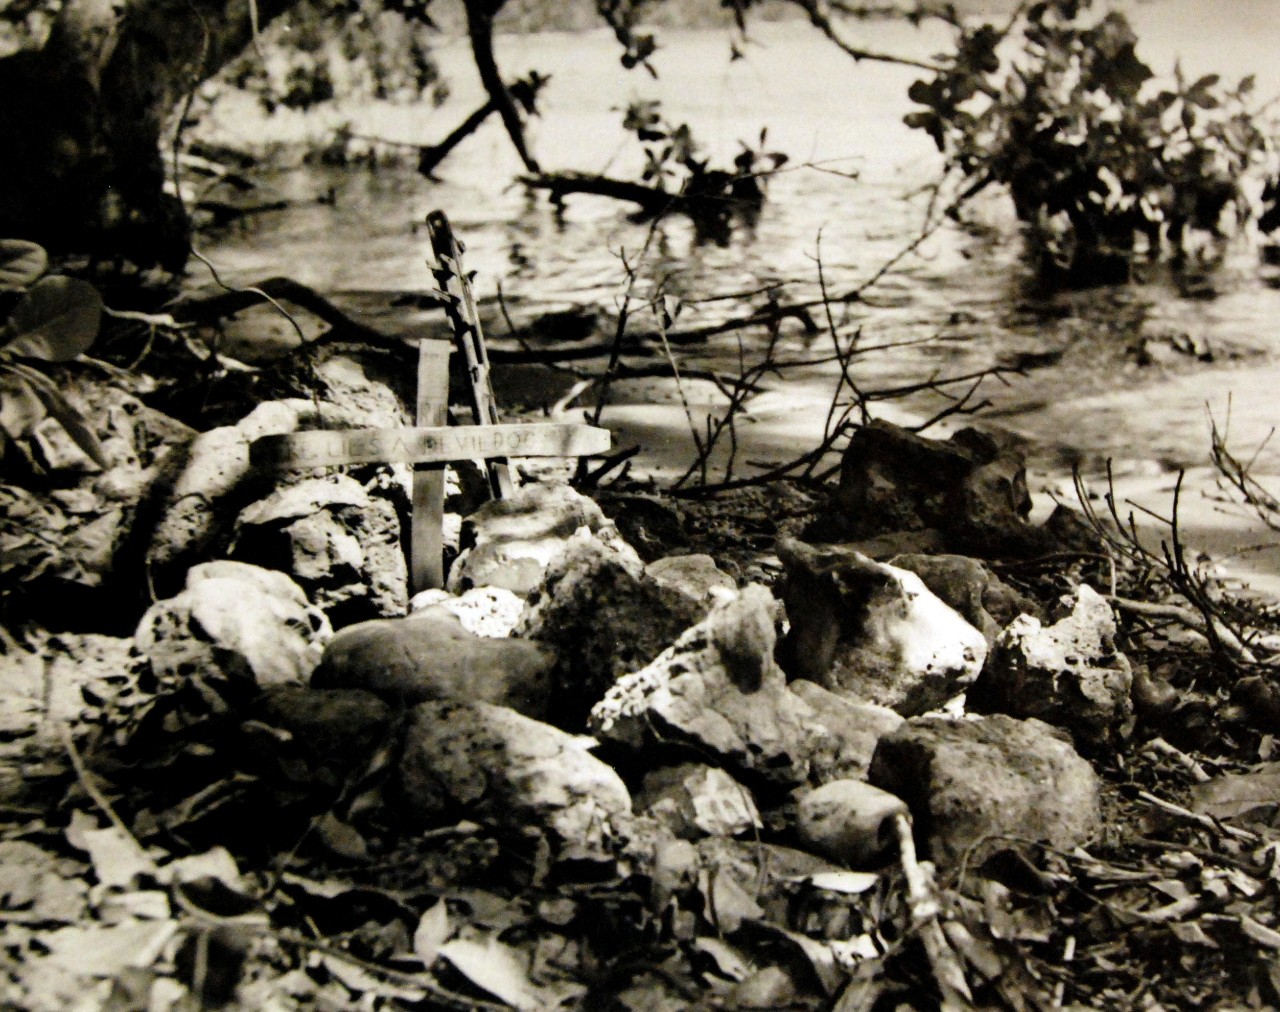 LC-Lot-801-12:  Guadalcanal Campaign, 7 August 1942 – February 9 1943.  Guadalcanal, Solomon Islands, 1942.  The final resting place of an unknown Marine, who was killed in action on the west bank of the Matanikau river.  U.S. Marine Corps Photograph-52765.  Photographed through Mylar sleeve.  Courtesy of the Library of Congress.   (2015/11/06).